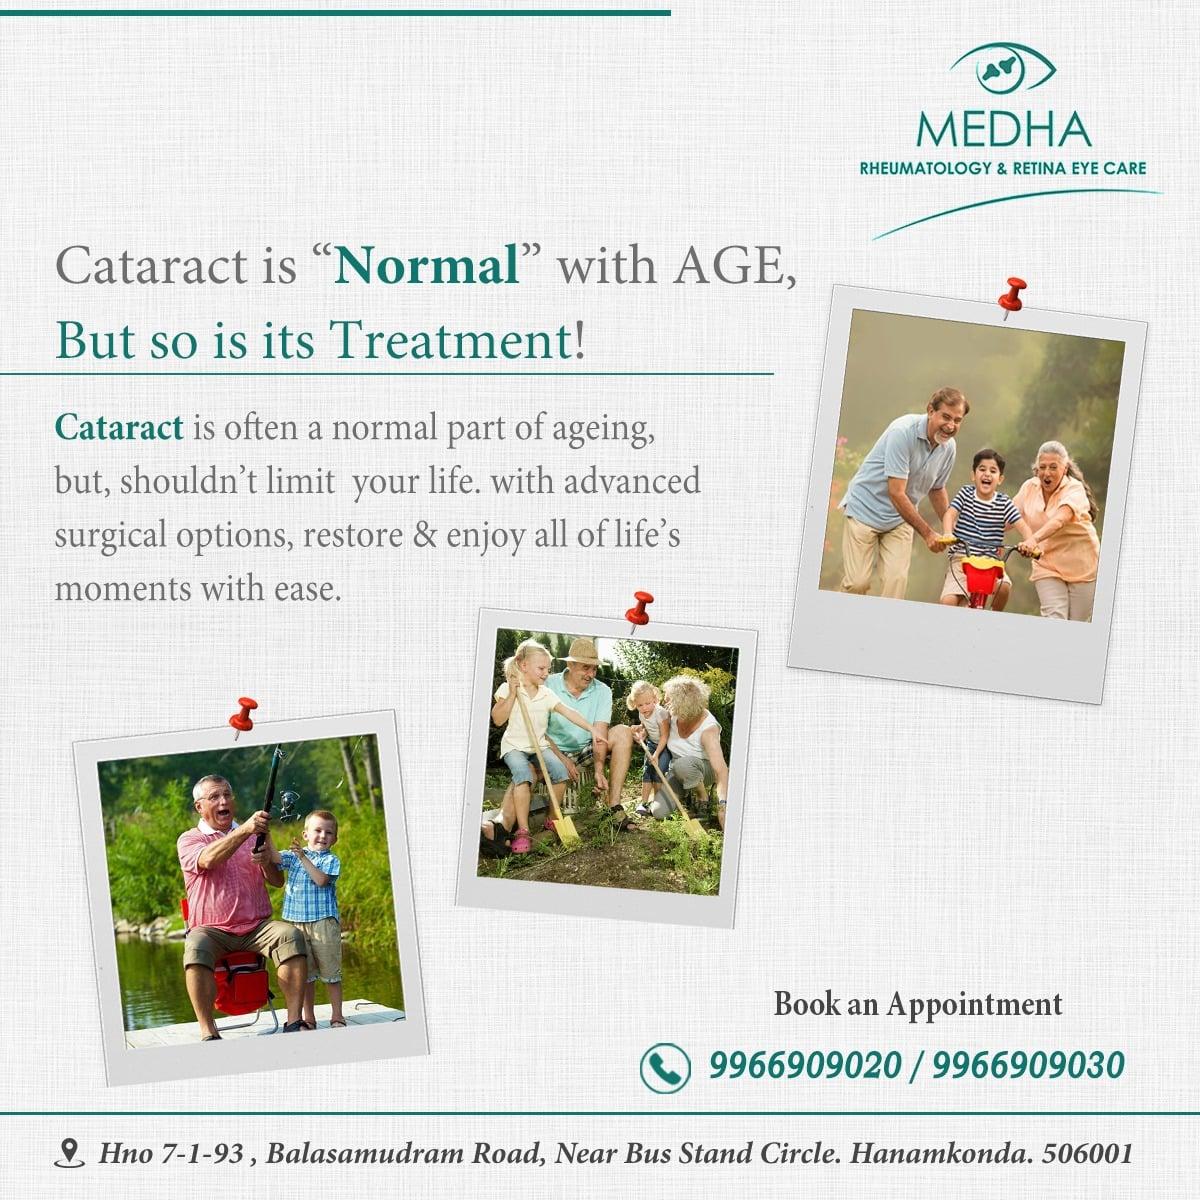 Cataract Is "NORMAL" With AGE, But So Is Its TREATMENT